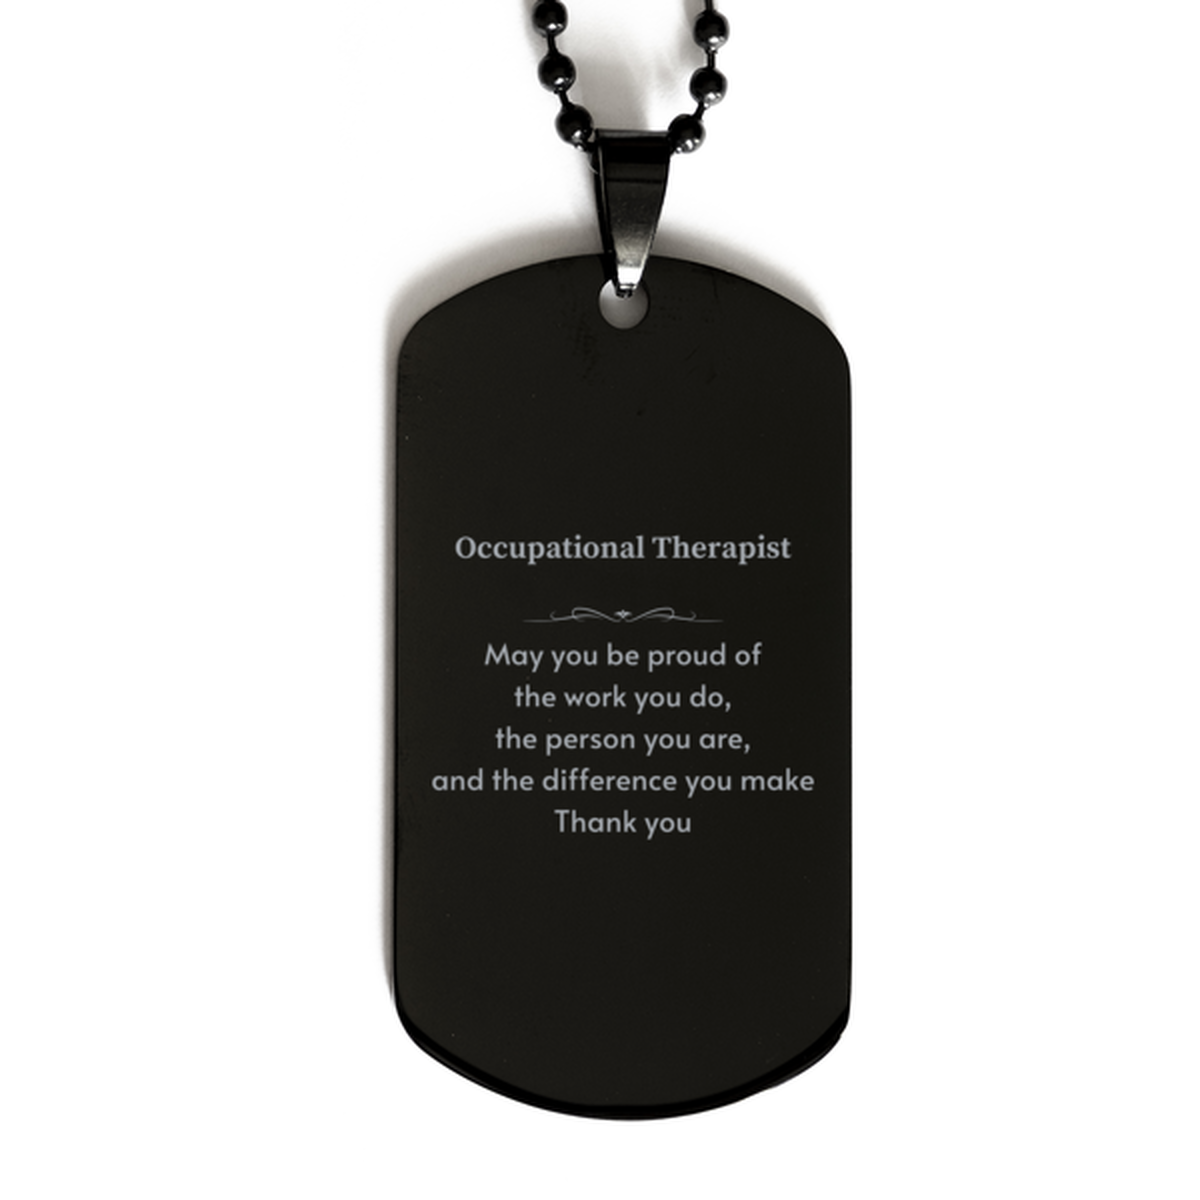 Heartwarming Black Dog Tag Retirement Coworkers Gifts for Occupational Therapist, Occupational Therapist May You be proud of the work you do, the person you are Gifts for Boss Men Women Friends